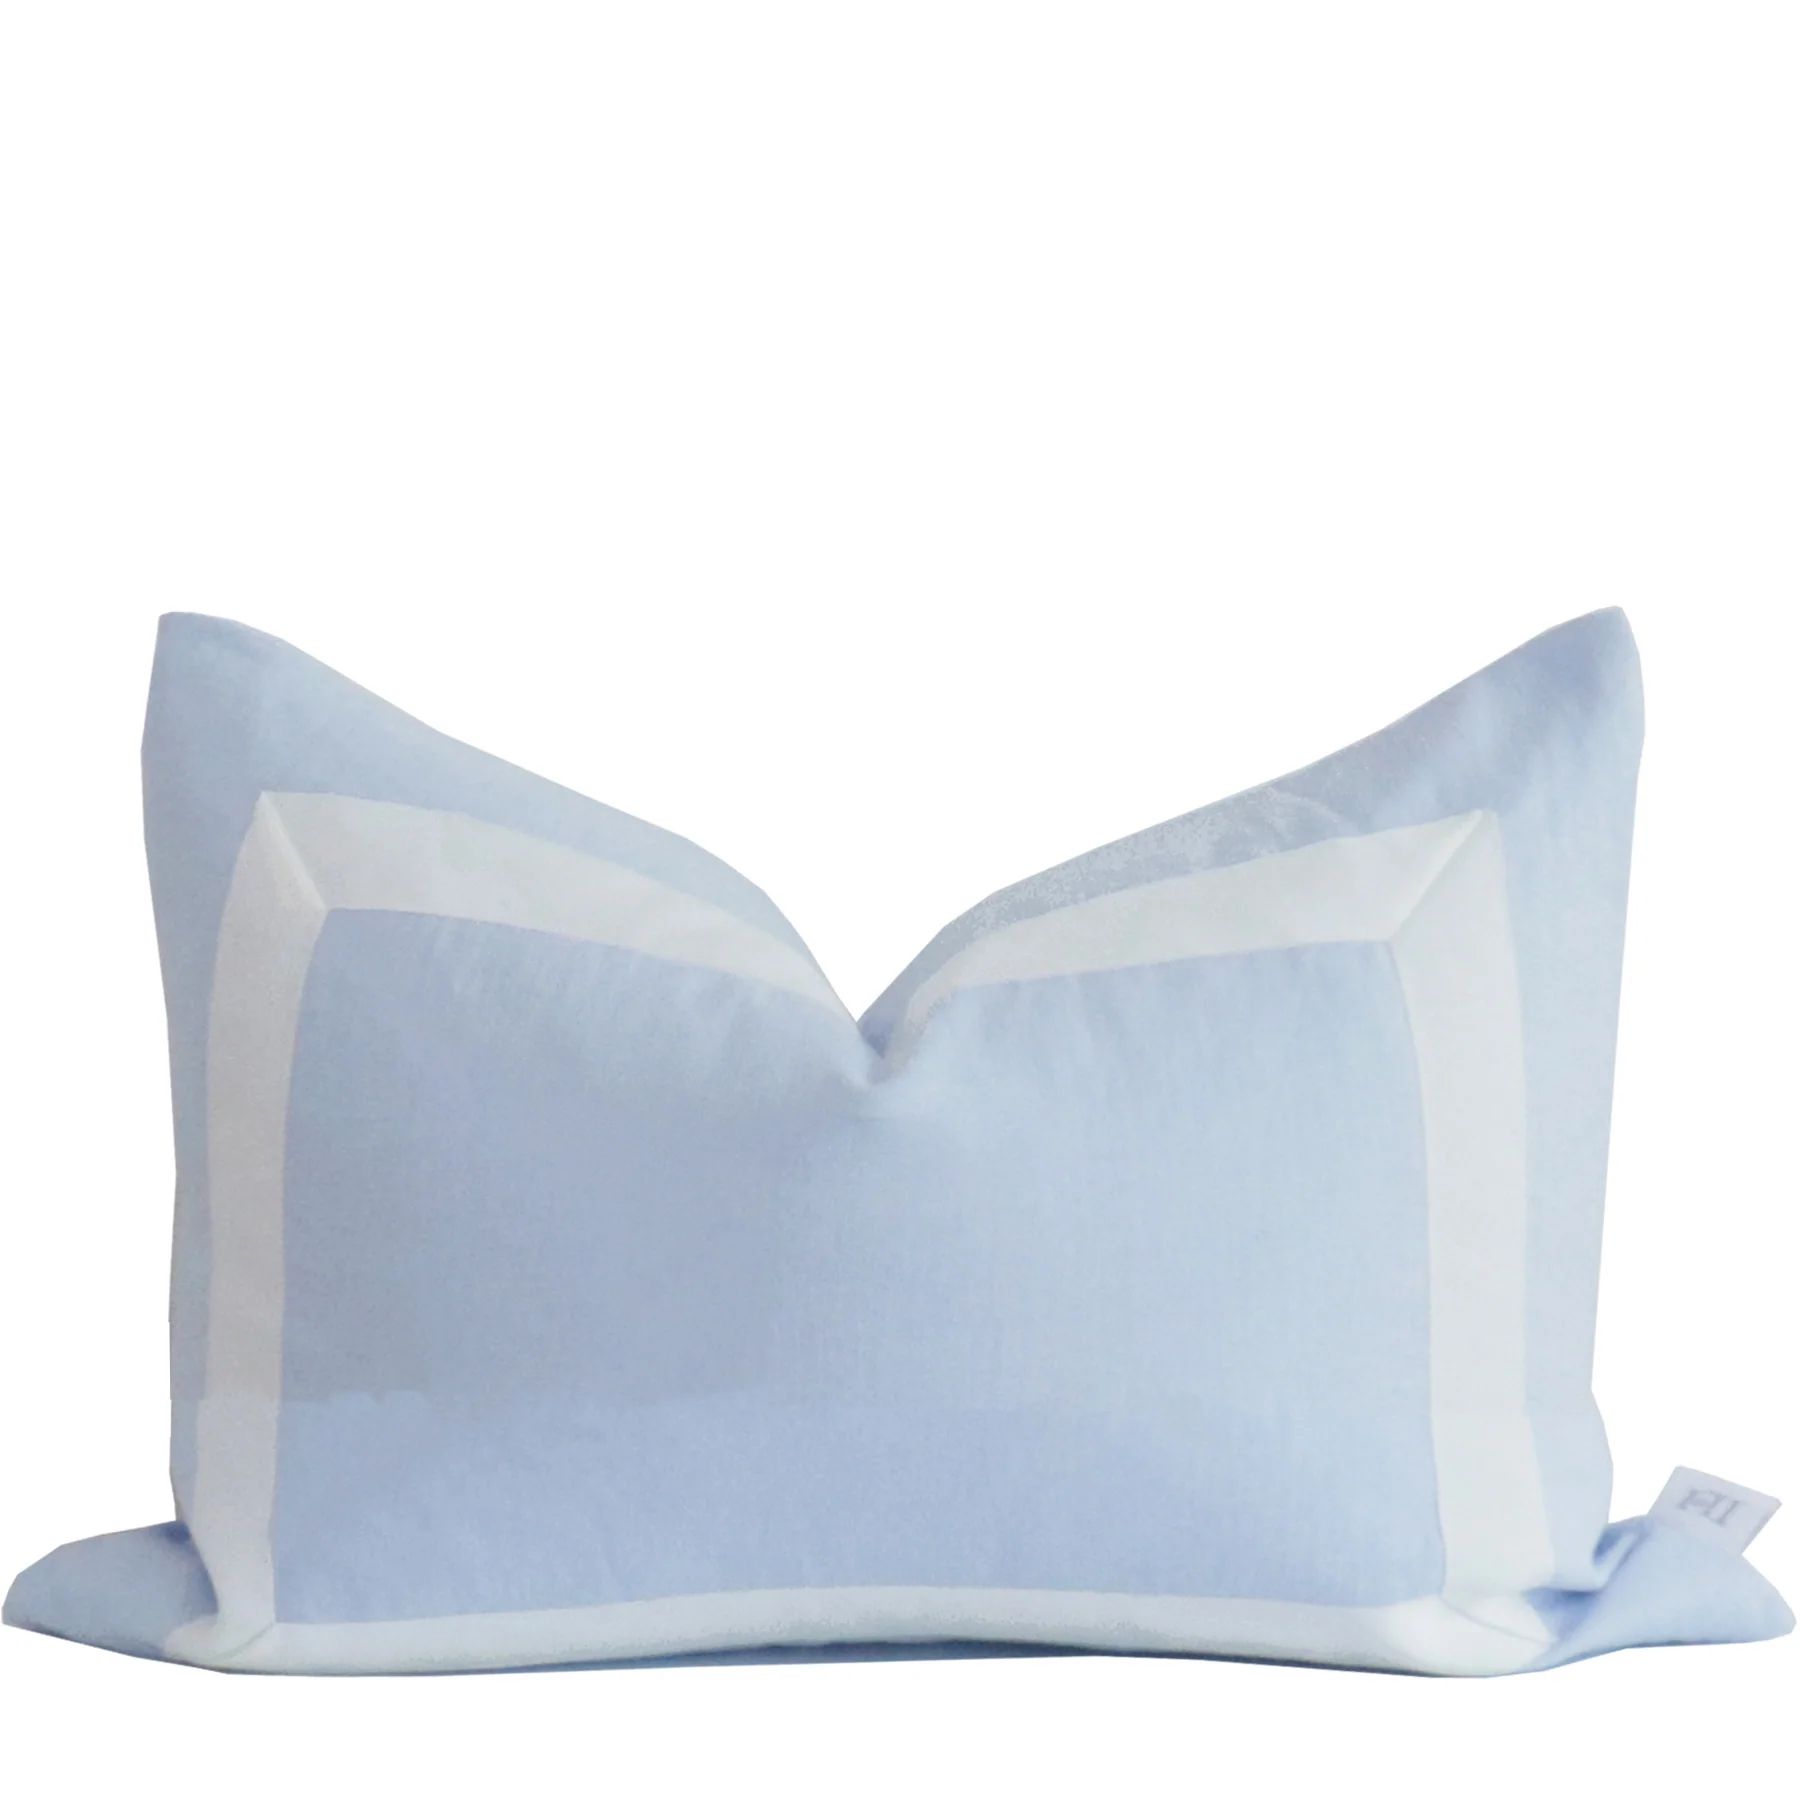 Sky Blue Organic Linen Pillow Cover with White Ribbon Trim | Lo Home by Lauren Haskell Designs